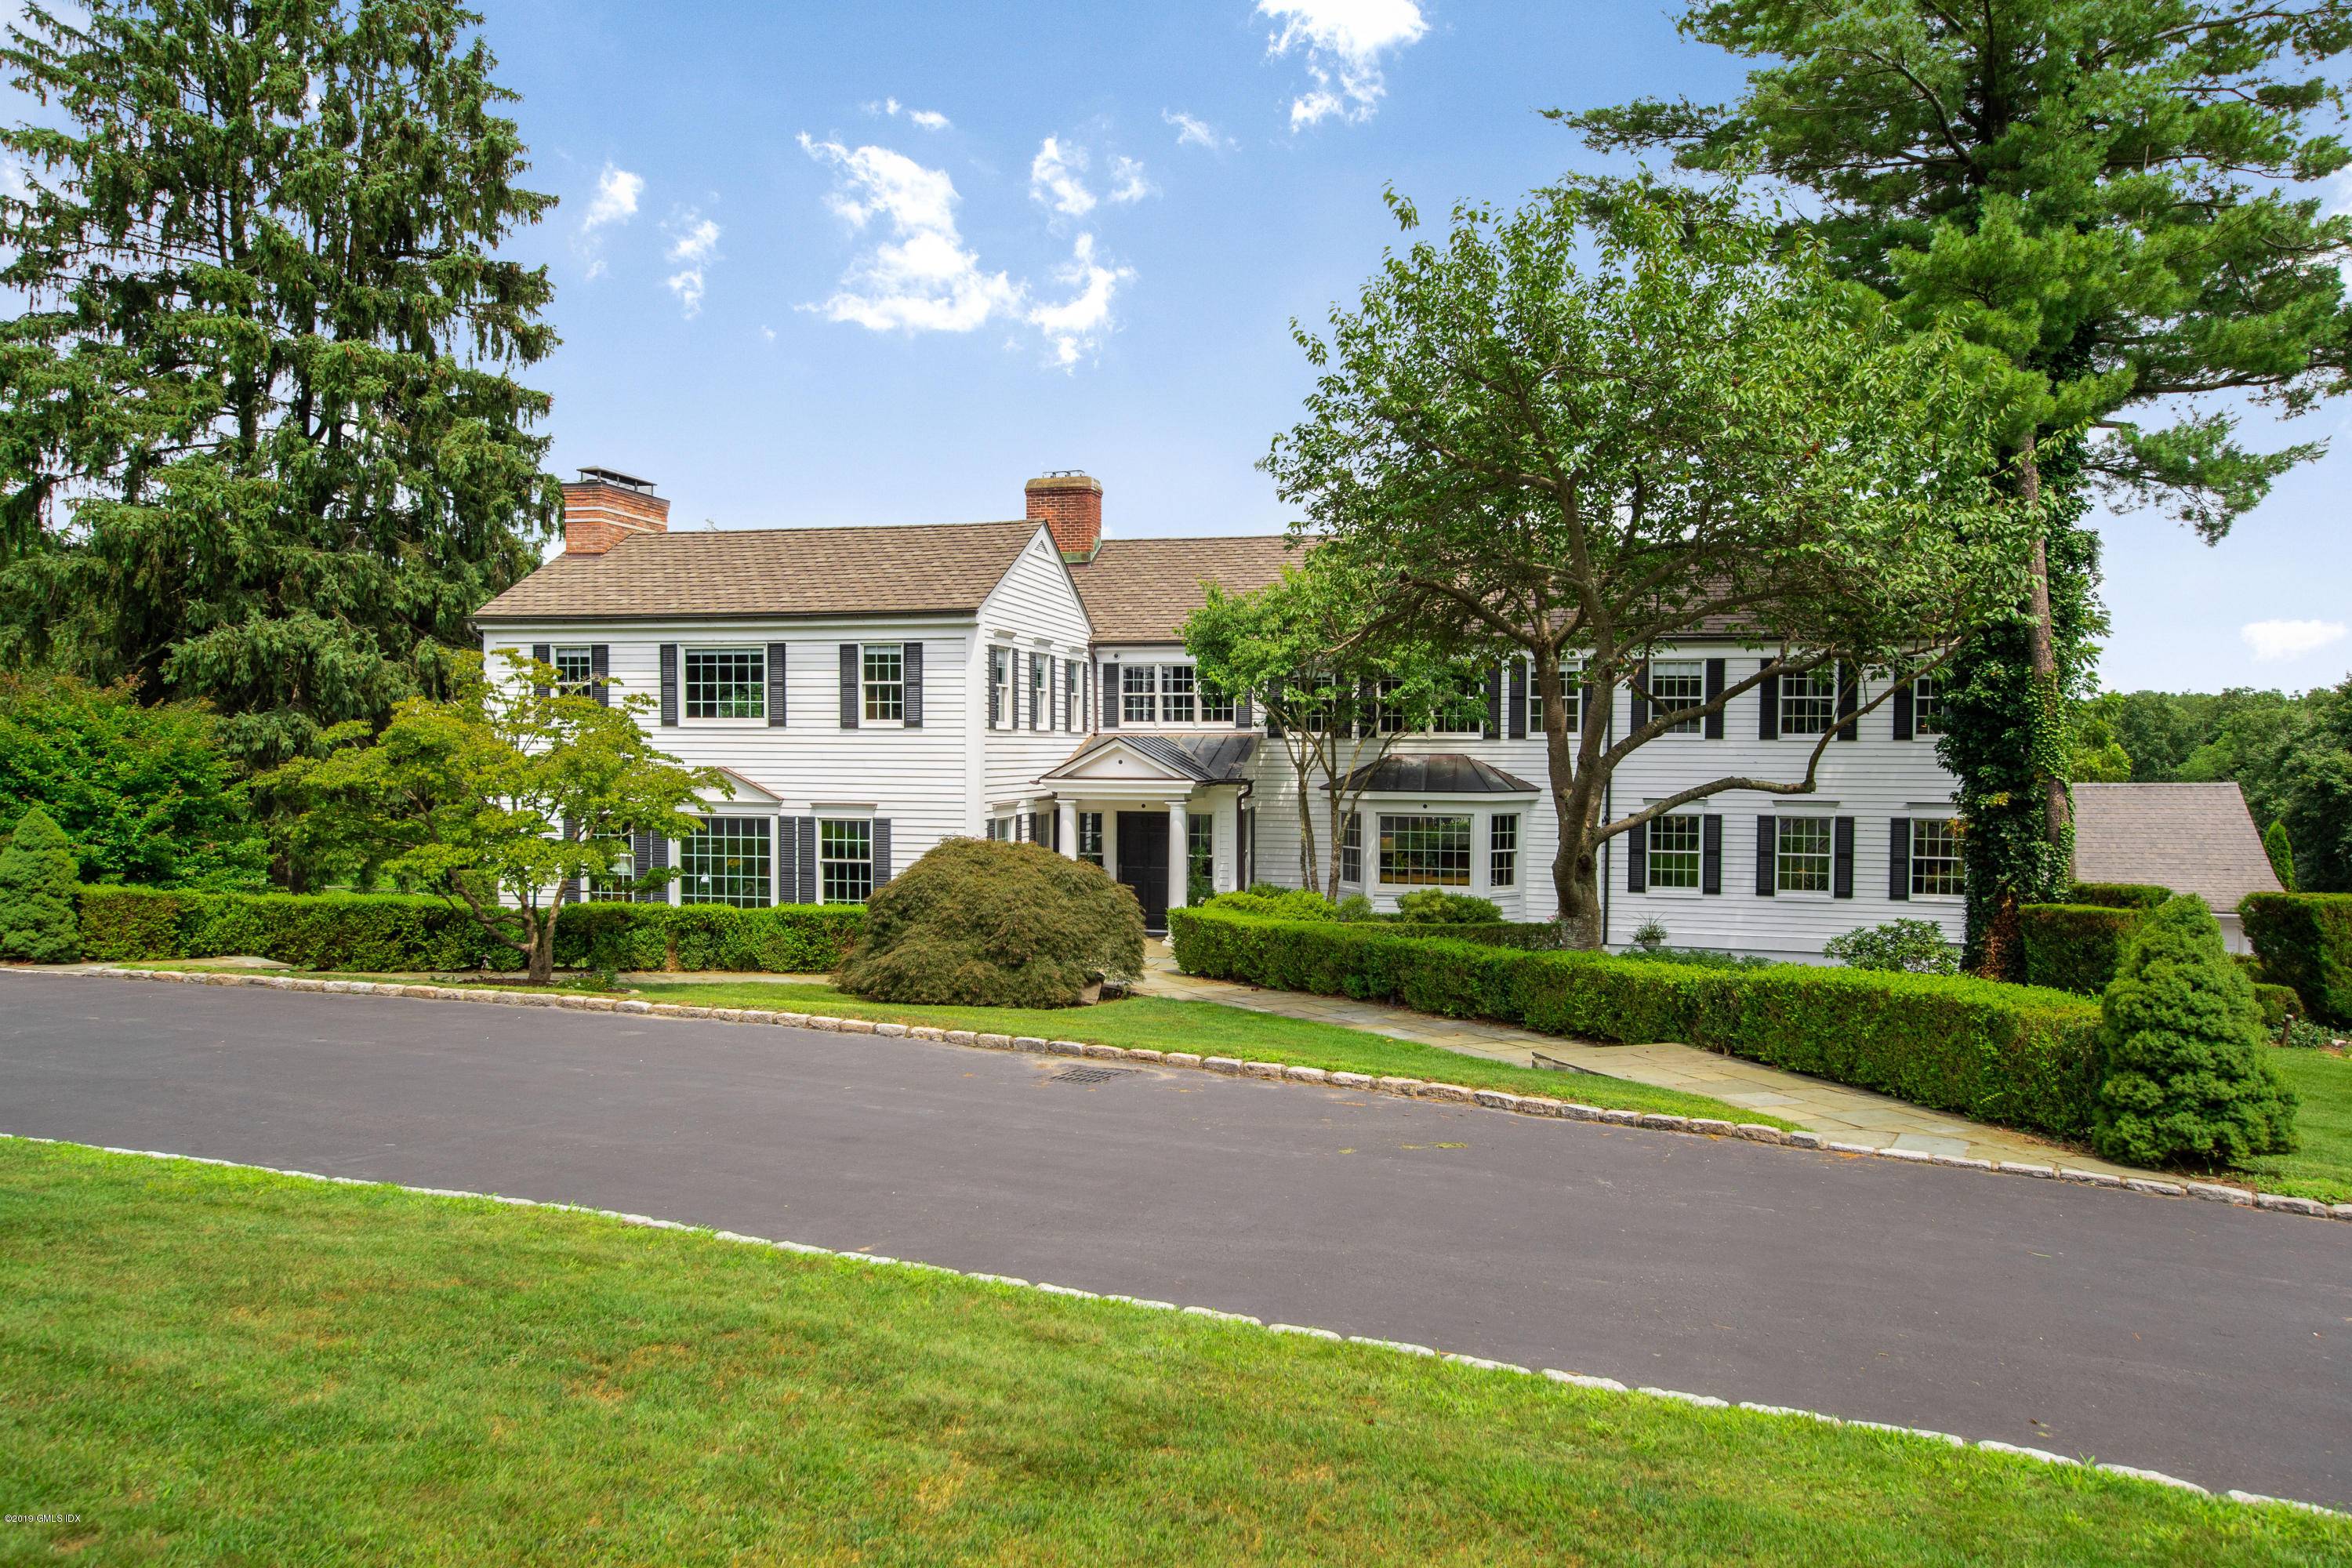 CONNECTICUT CLASSIC. CENTER HALL COLONIAL, GRACIOUS FOYER WITH COFFERED CEILING LEADS TO FORMAL L R.